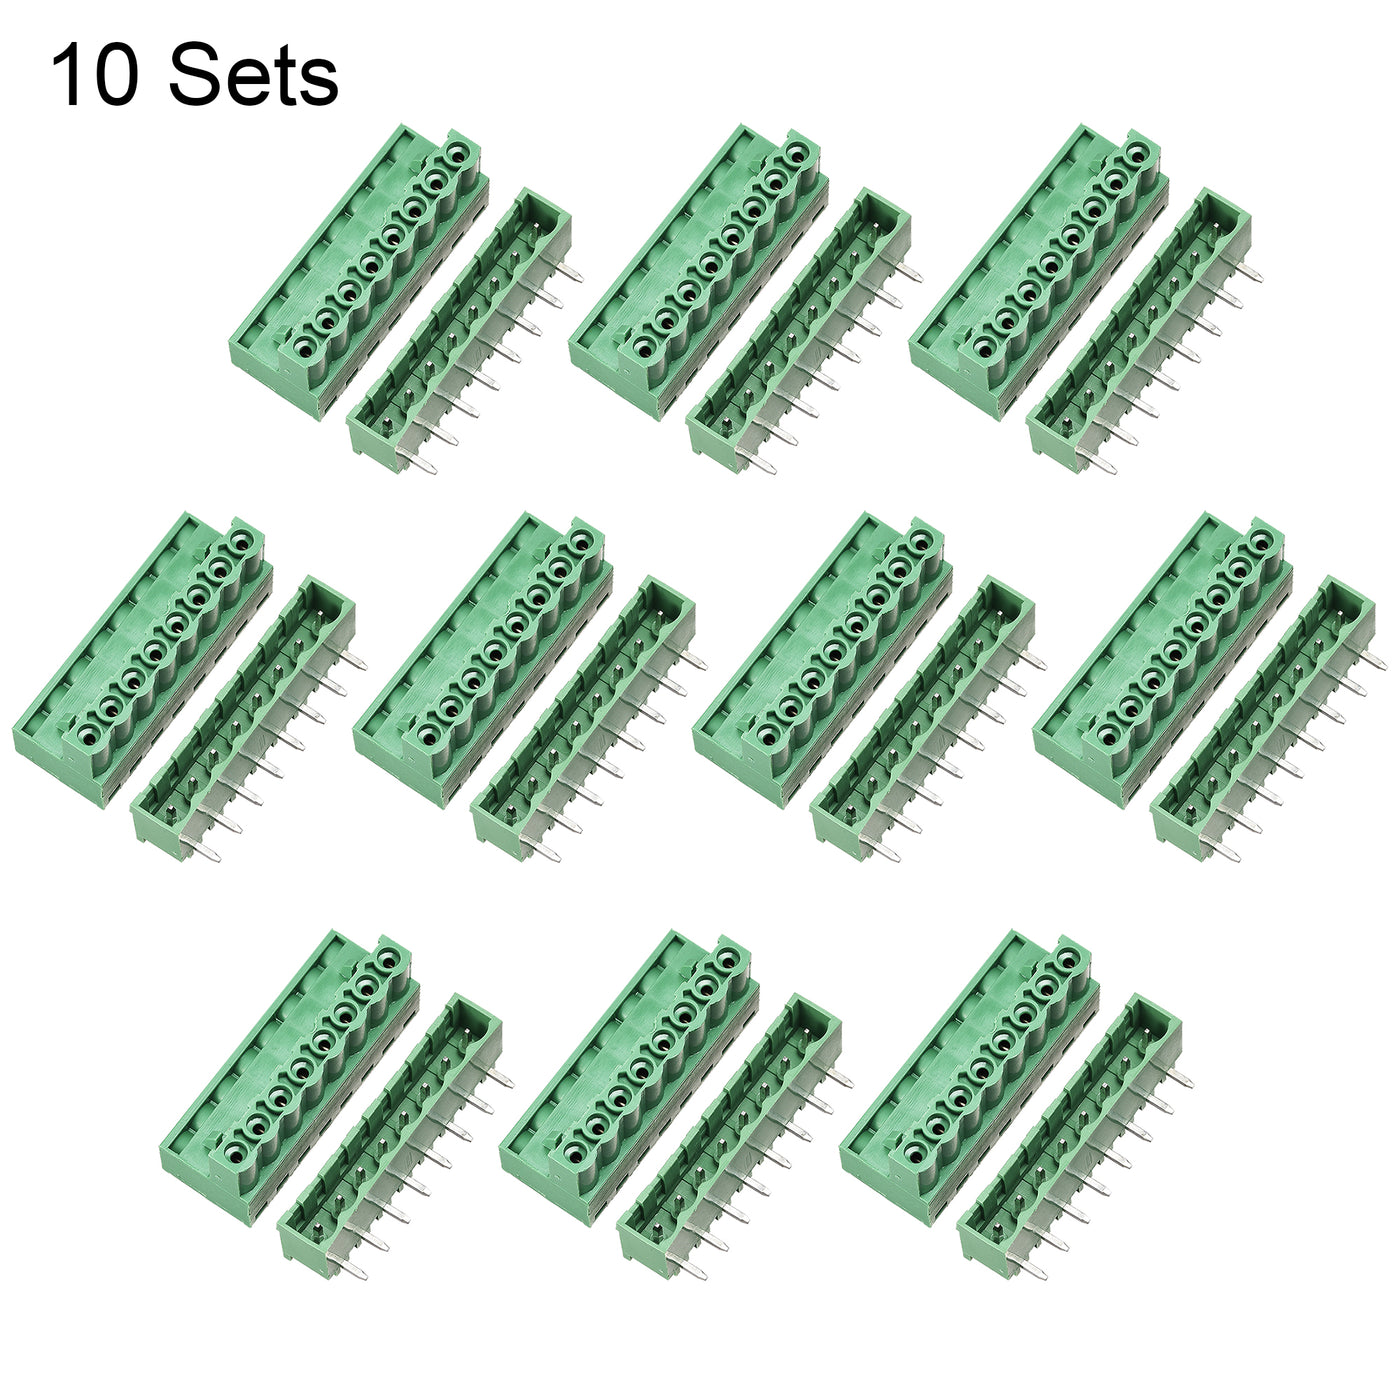 uxcell Uxcell 8-Pin 5.08mm Pitch Right Angle PCB Screw Terminal Block Connector 10 Sets